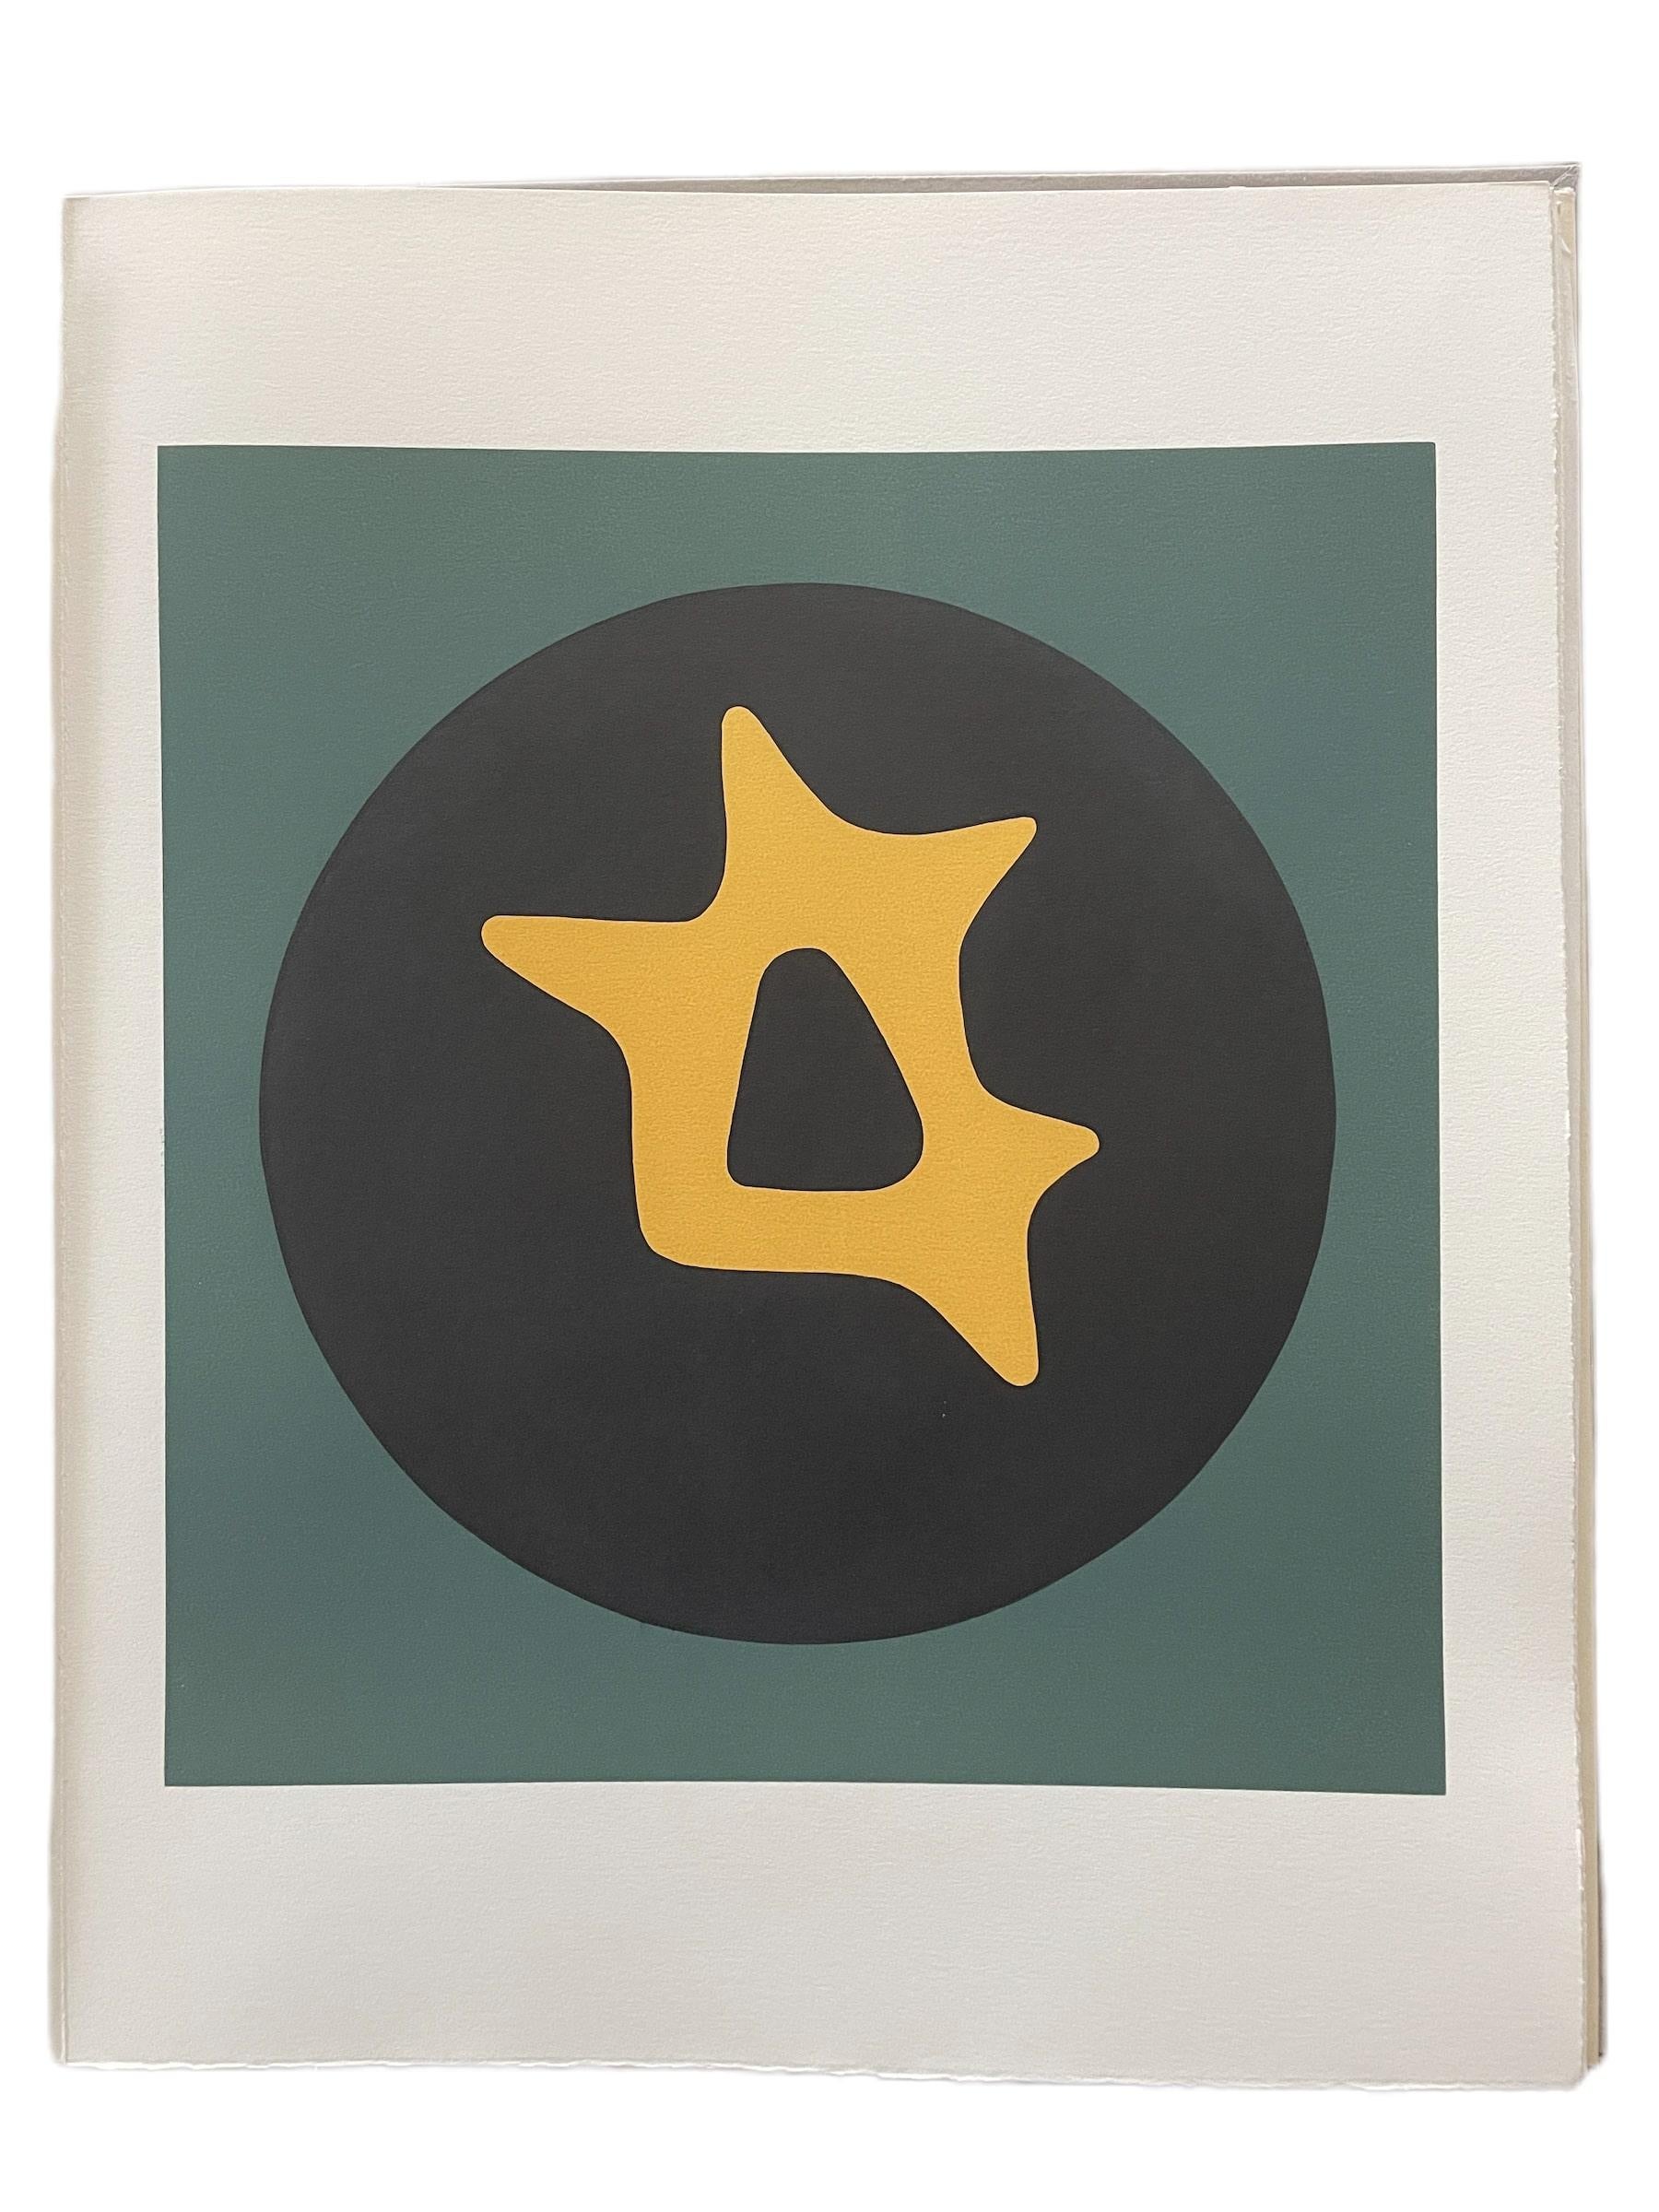  Soleil Recerclé - Gray Abstract Print by Hans Arp